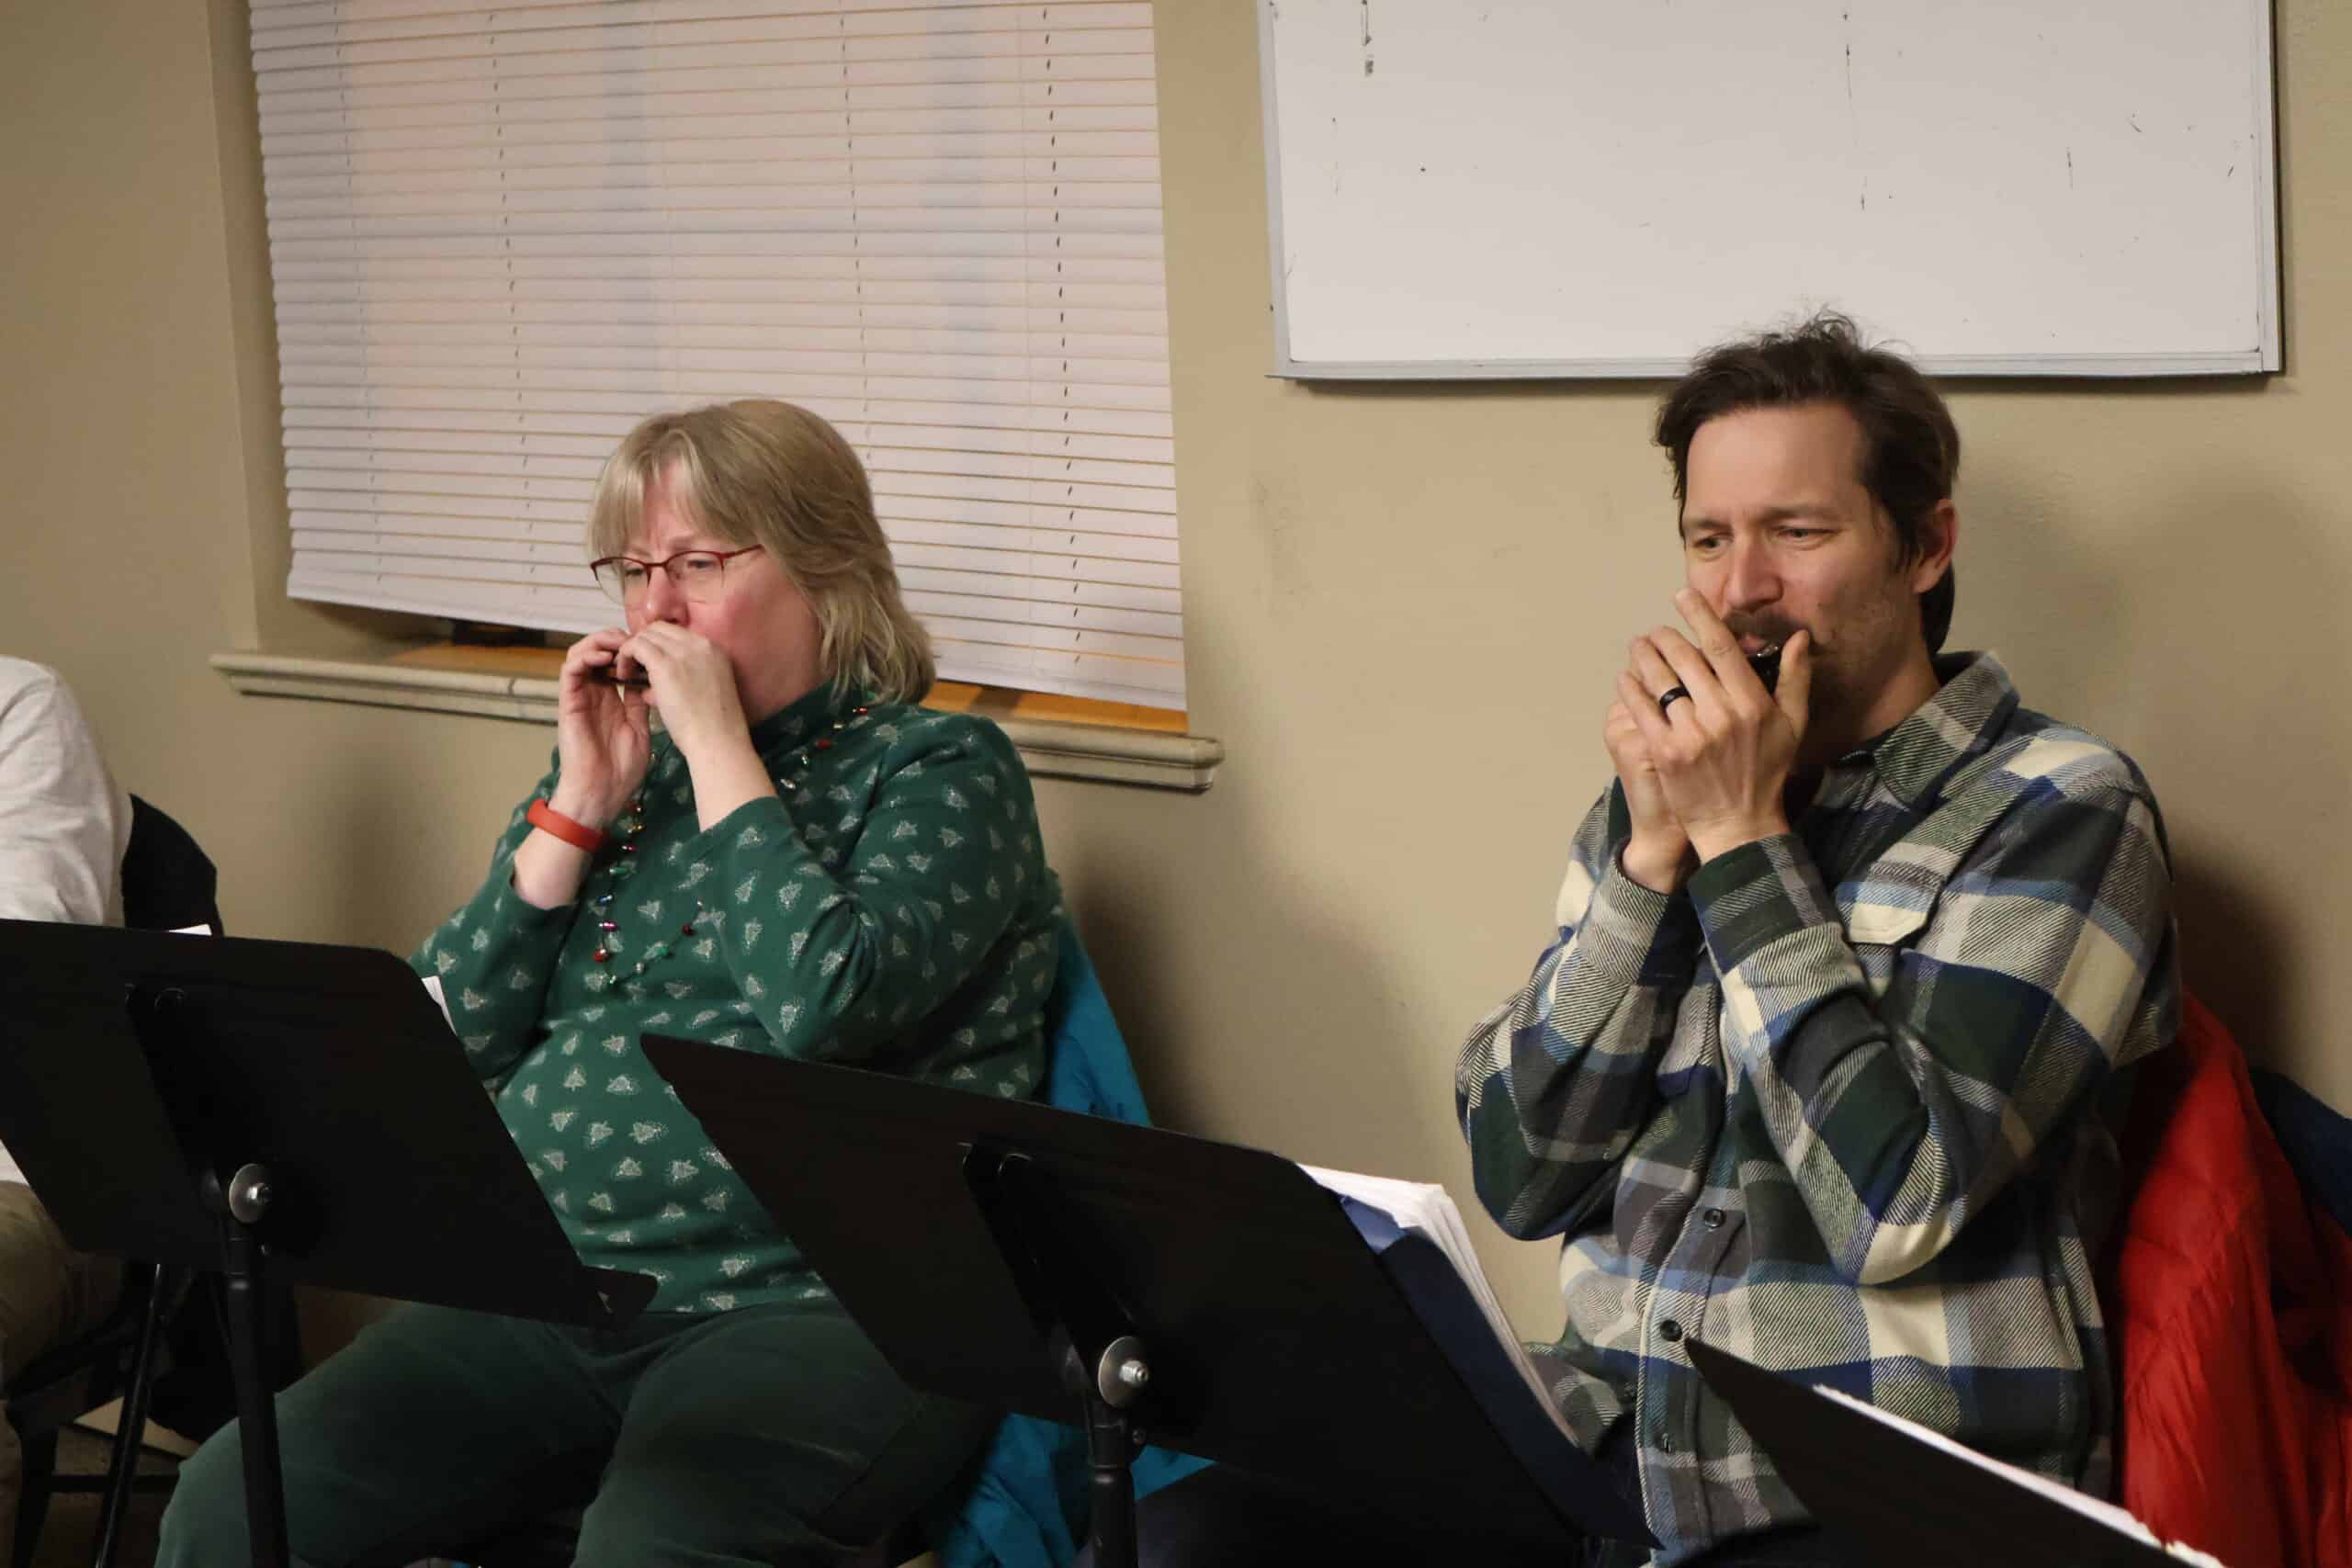 Two students, one male and one female, play harmonicas during a group class at Swallow Hill Music.